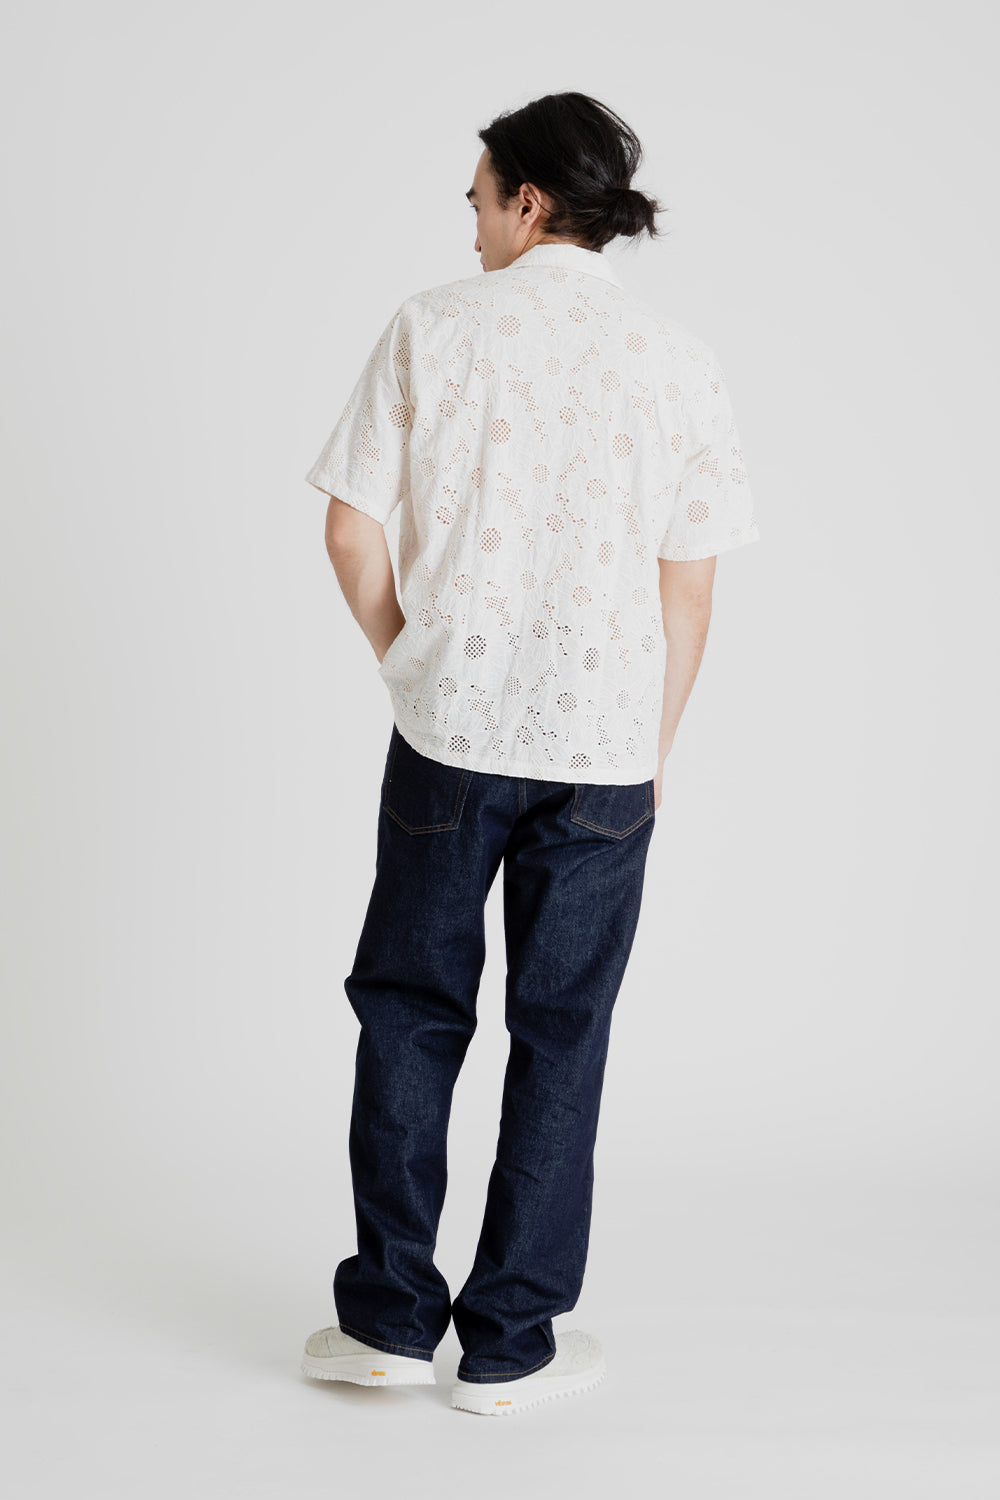 Sunflower Cayo SS Shirt in White | Wallace Mercantile Shop